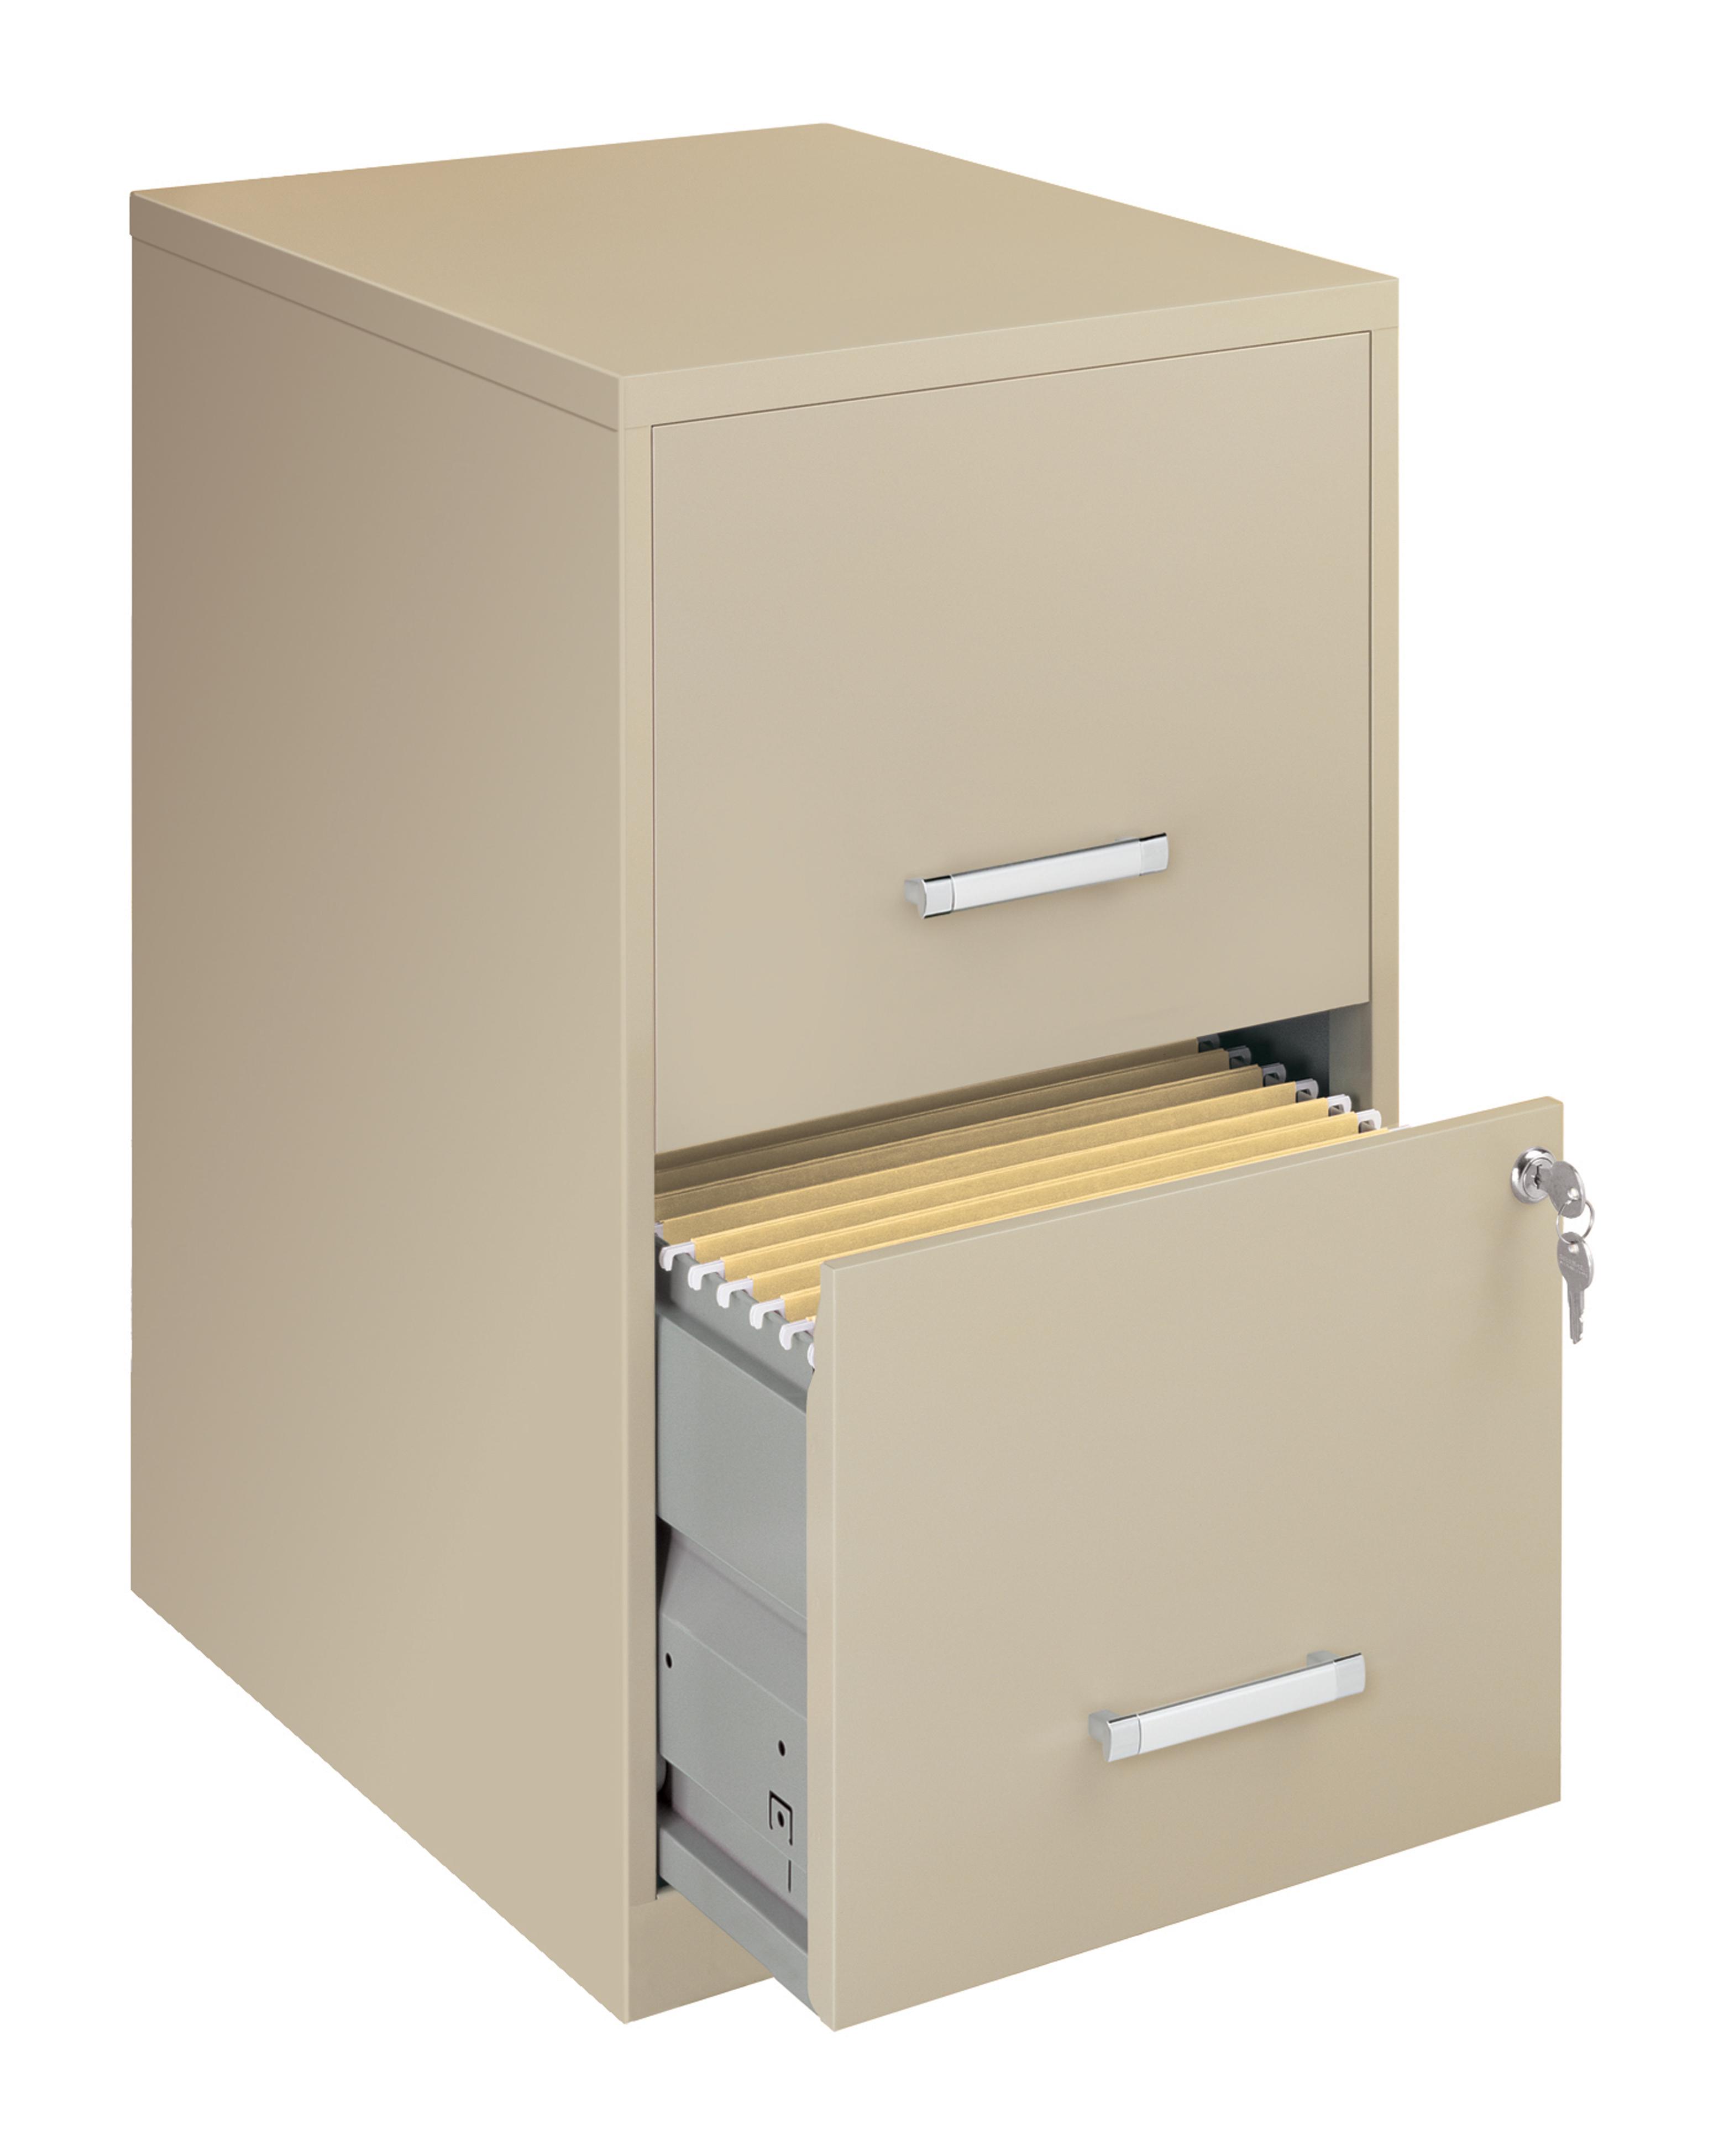 File Cabinet Pro 6.5 download free